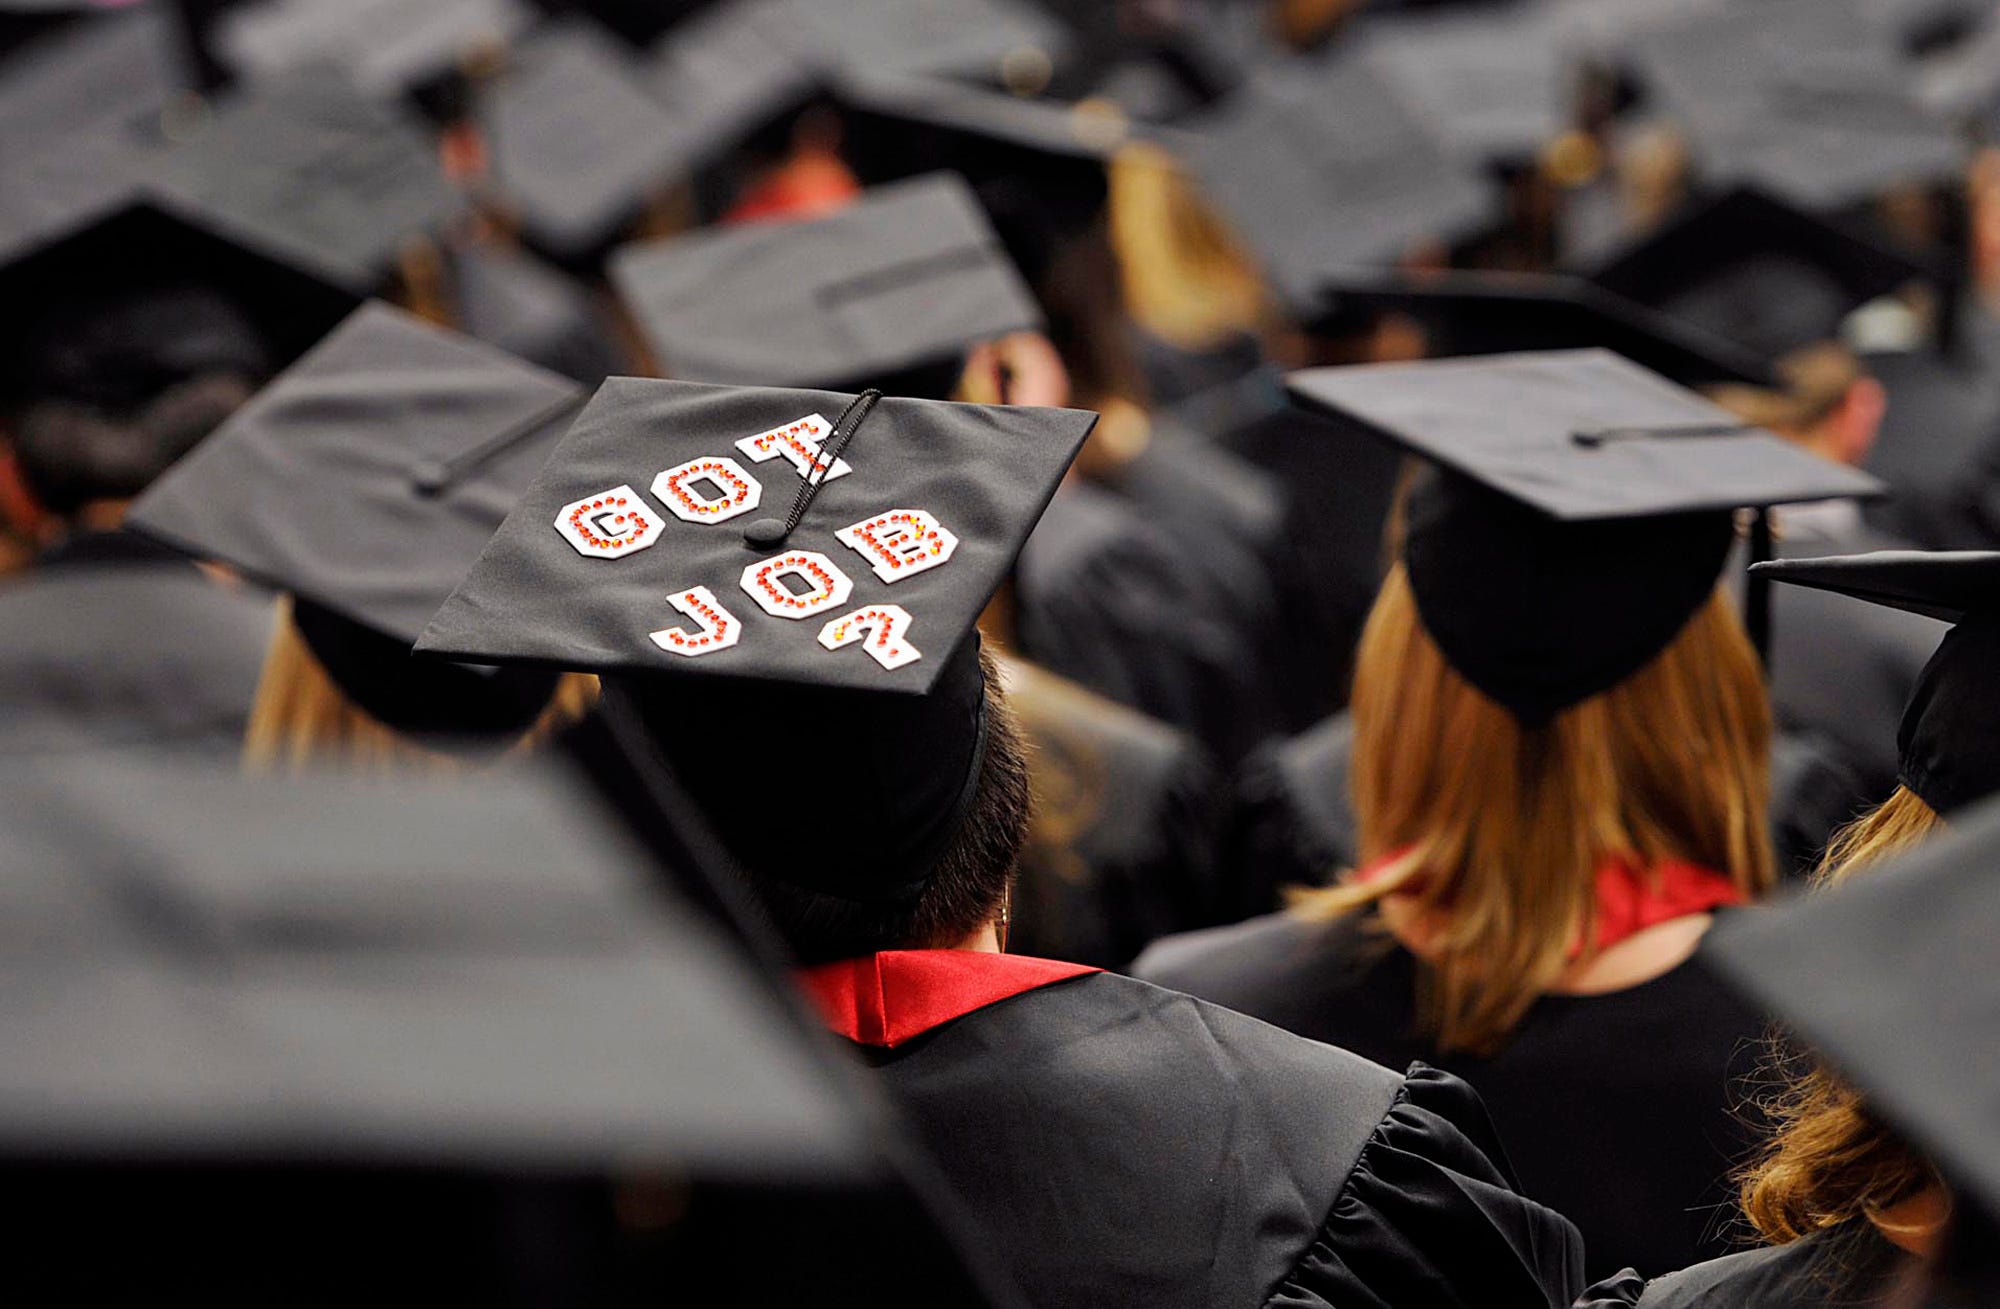 Survey More employers plan to hire new college grads